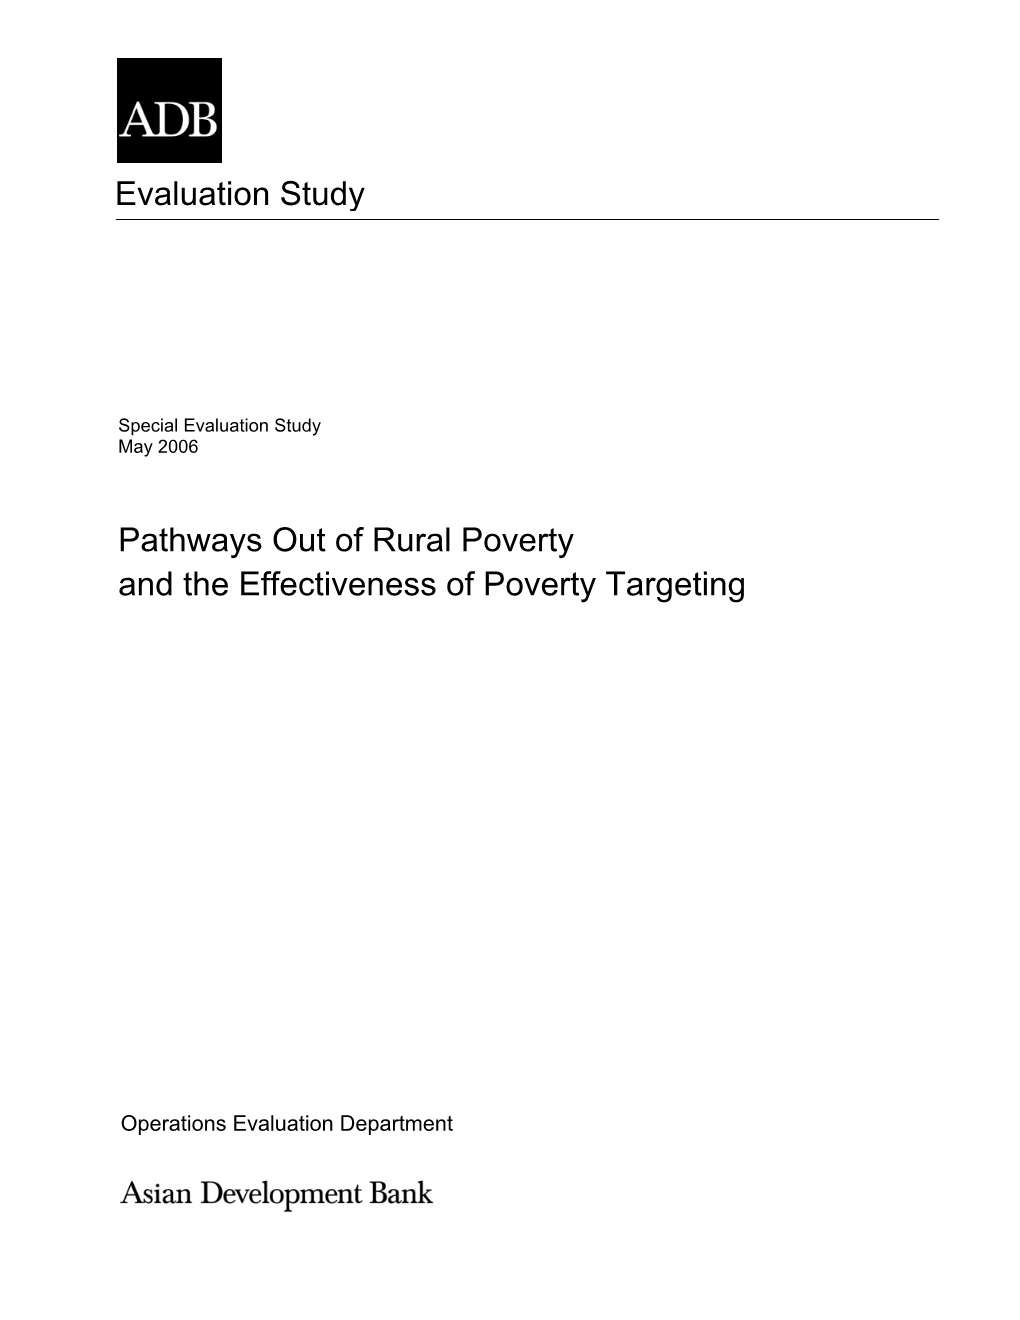 Pathways out of Rural Poverty and the Effectiveness of Poverty Targeting